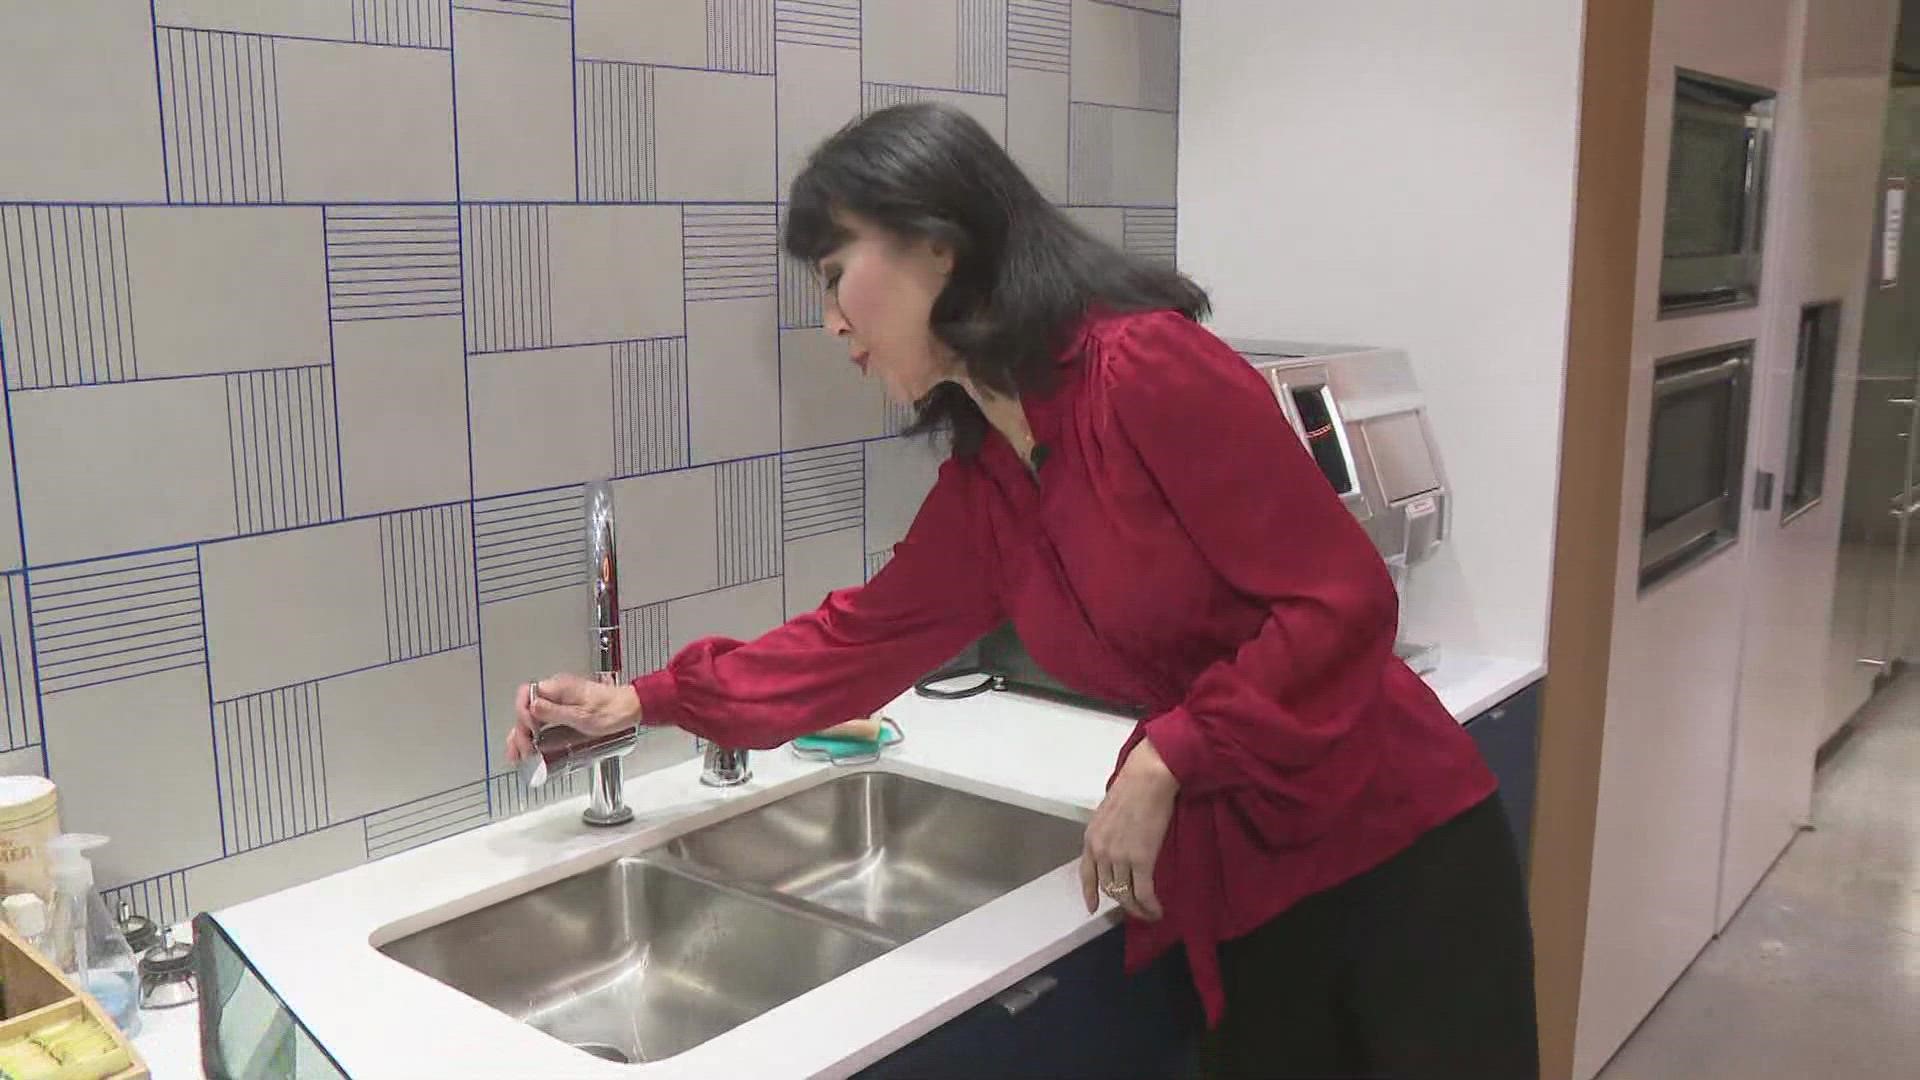 The City of Houston is asking residents not to drip their faucets to prevent water pressure from falling. But the county suggests trickling water overnight.